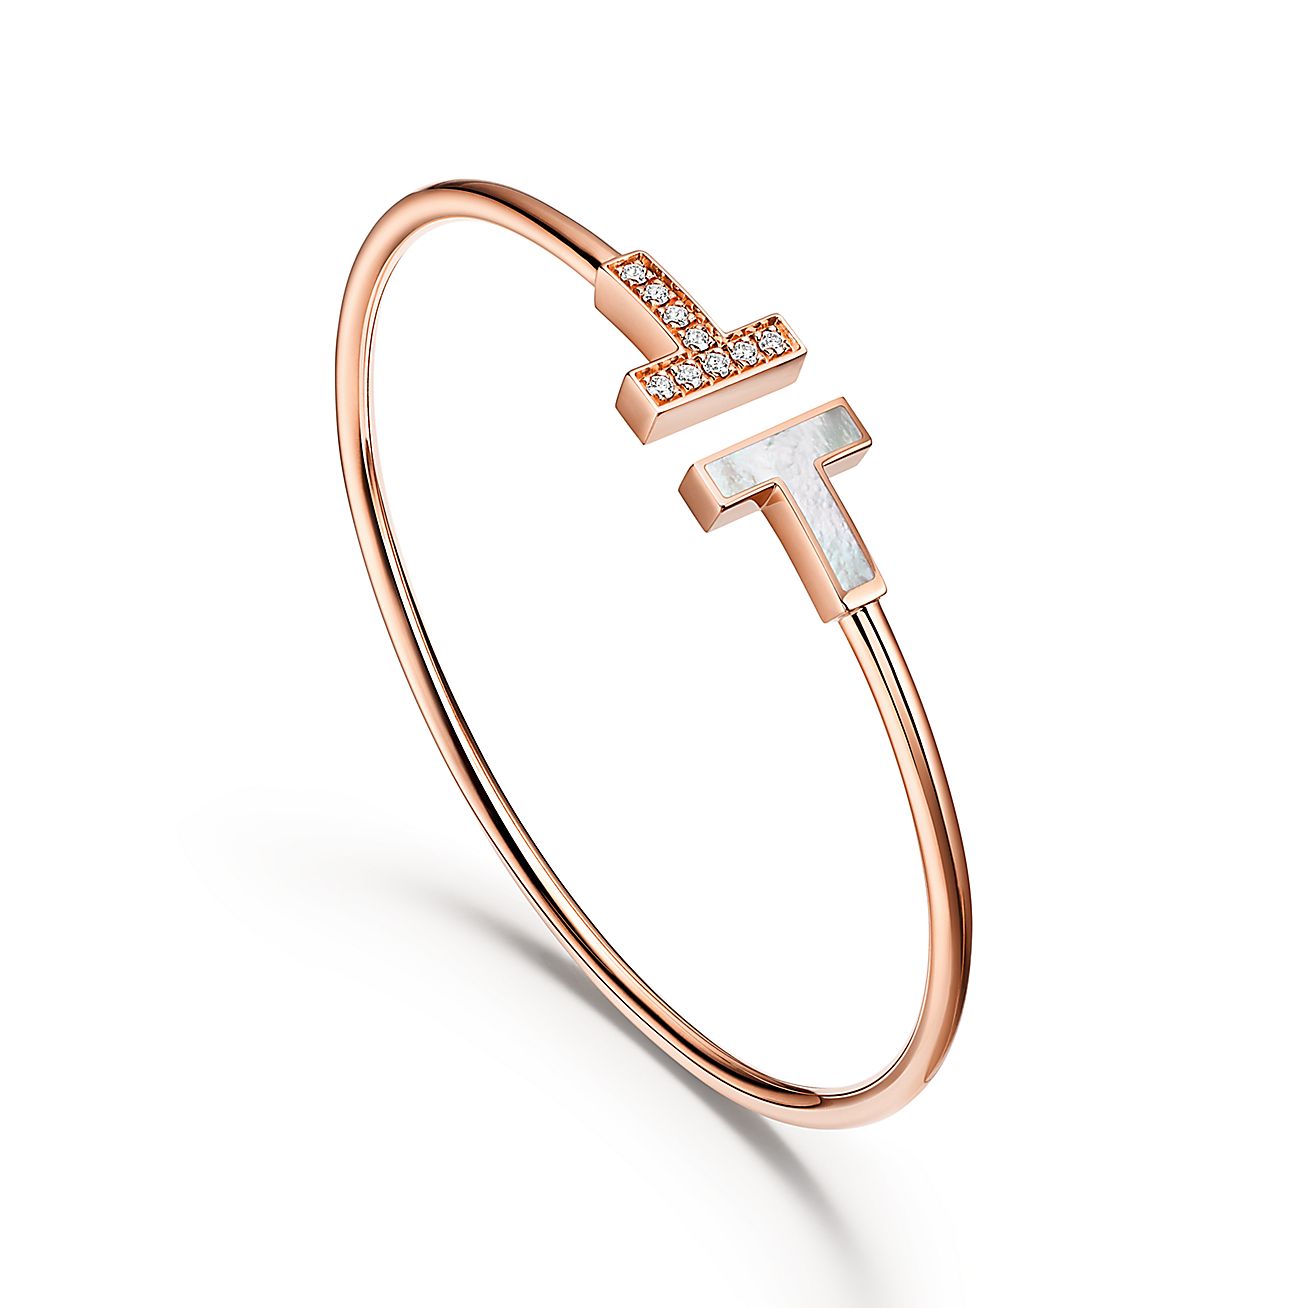 Tiffany T Wire Bracelet in Rose Gold with Diamonds, Size: Small